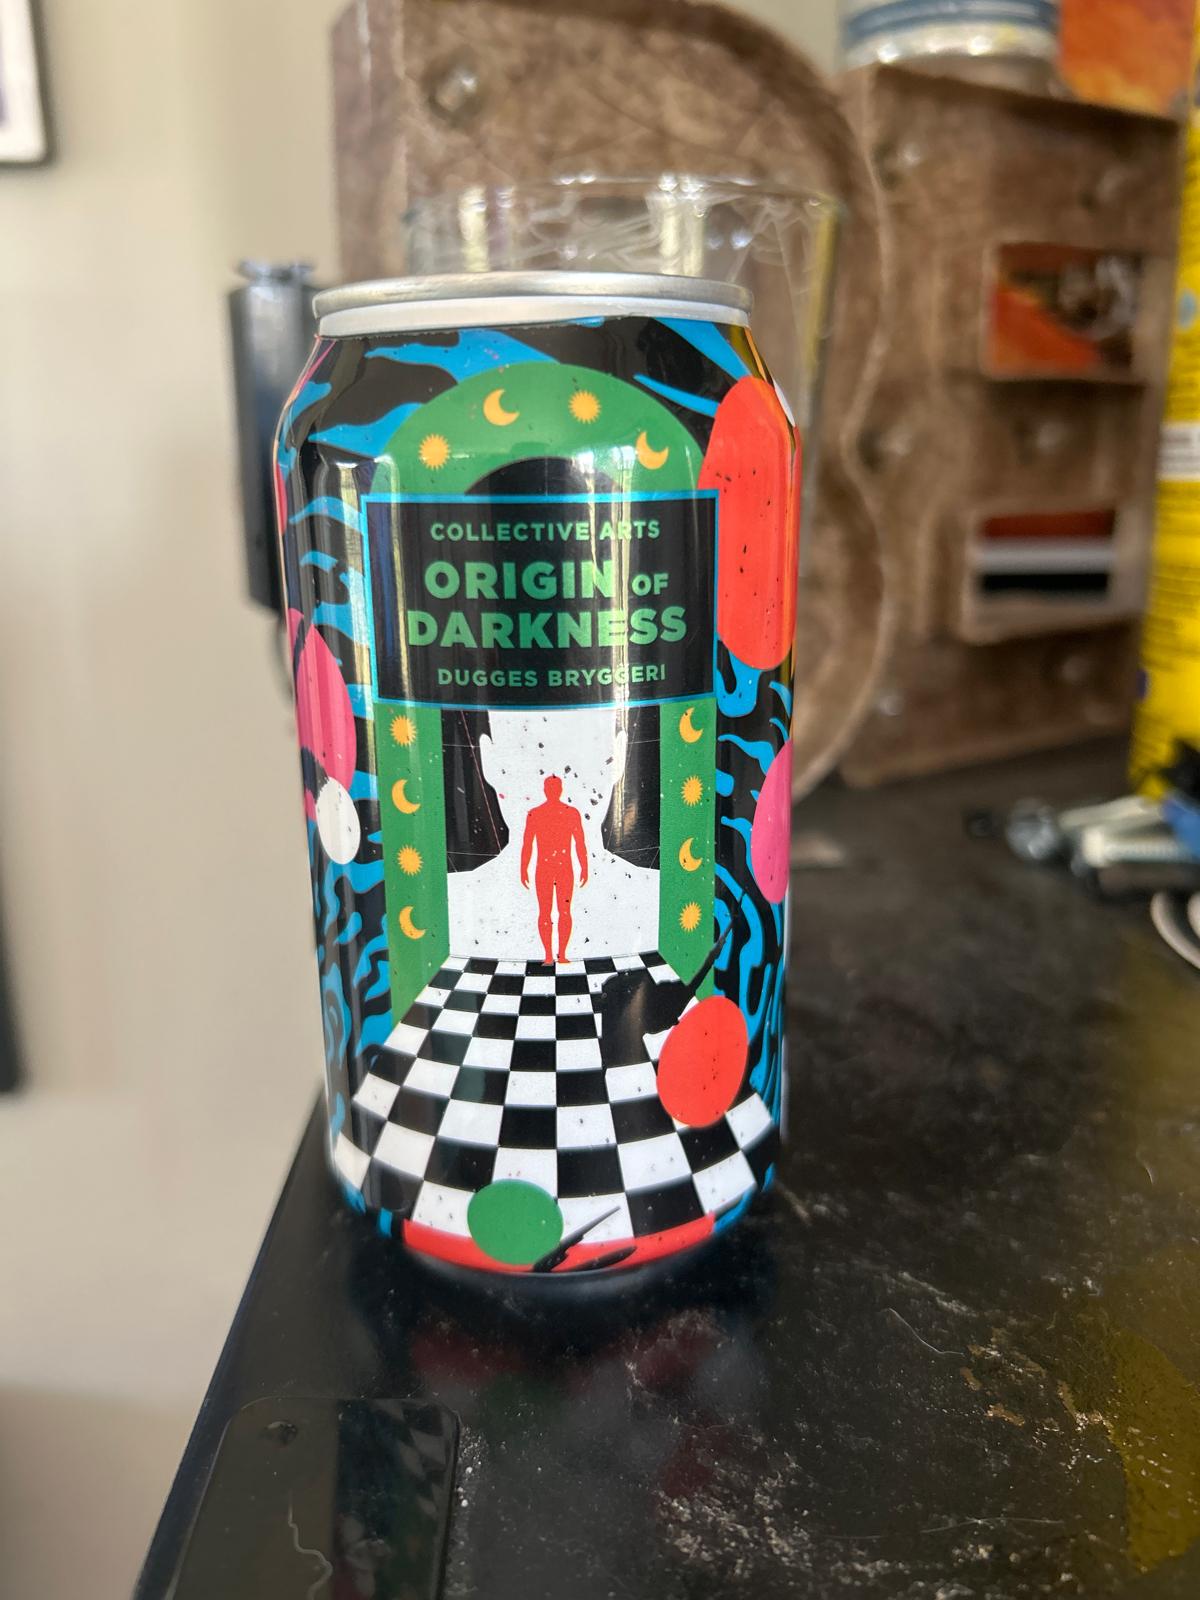 Origin of Darkness (Collaboration with Dugges Bryggeri)